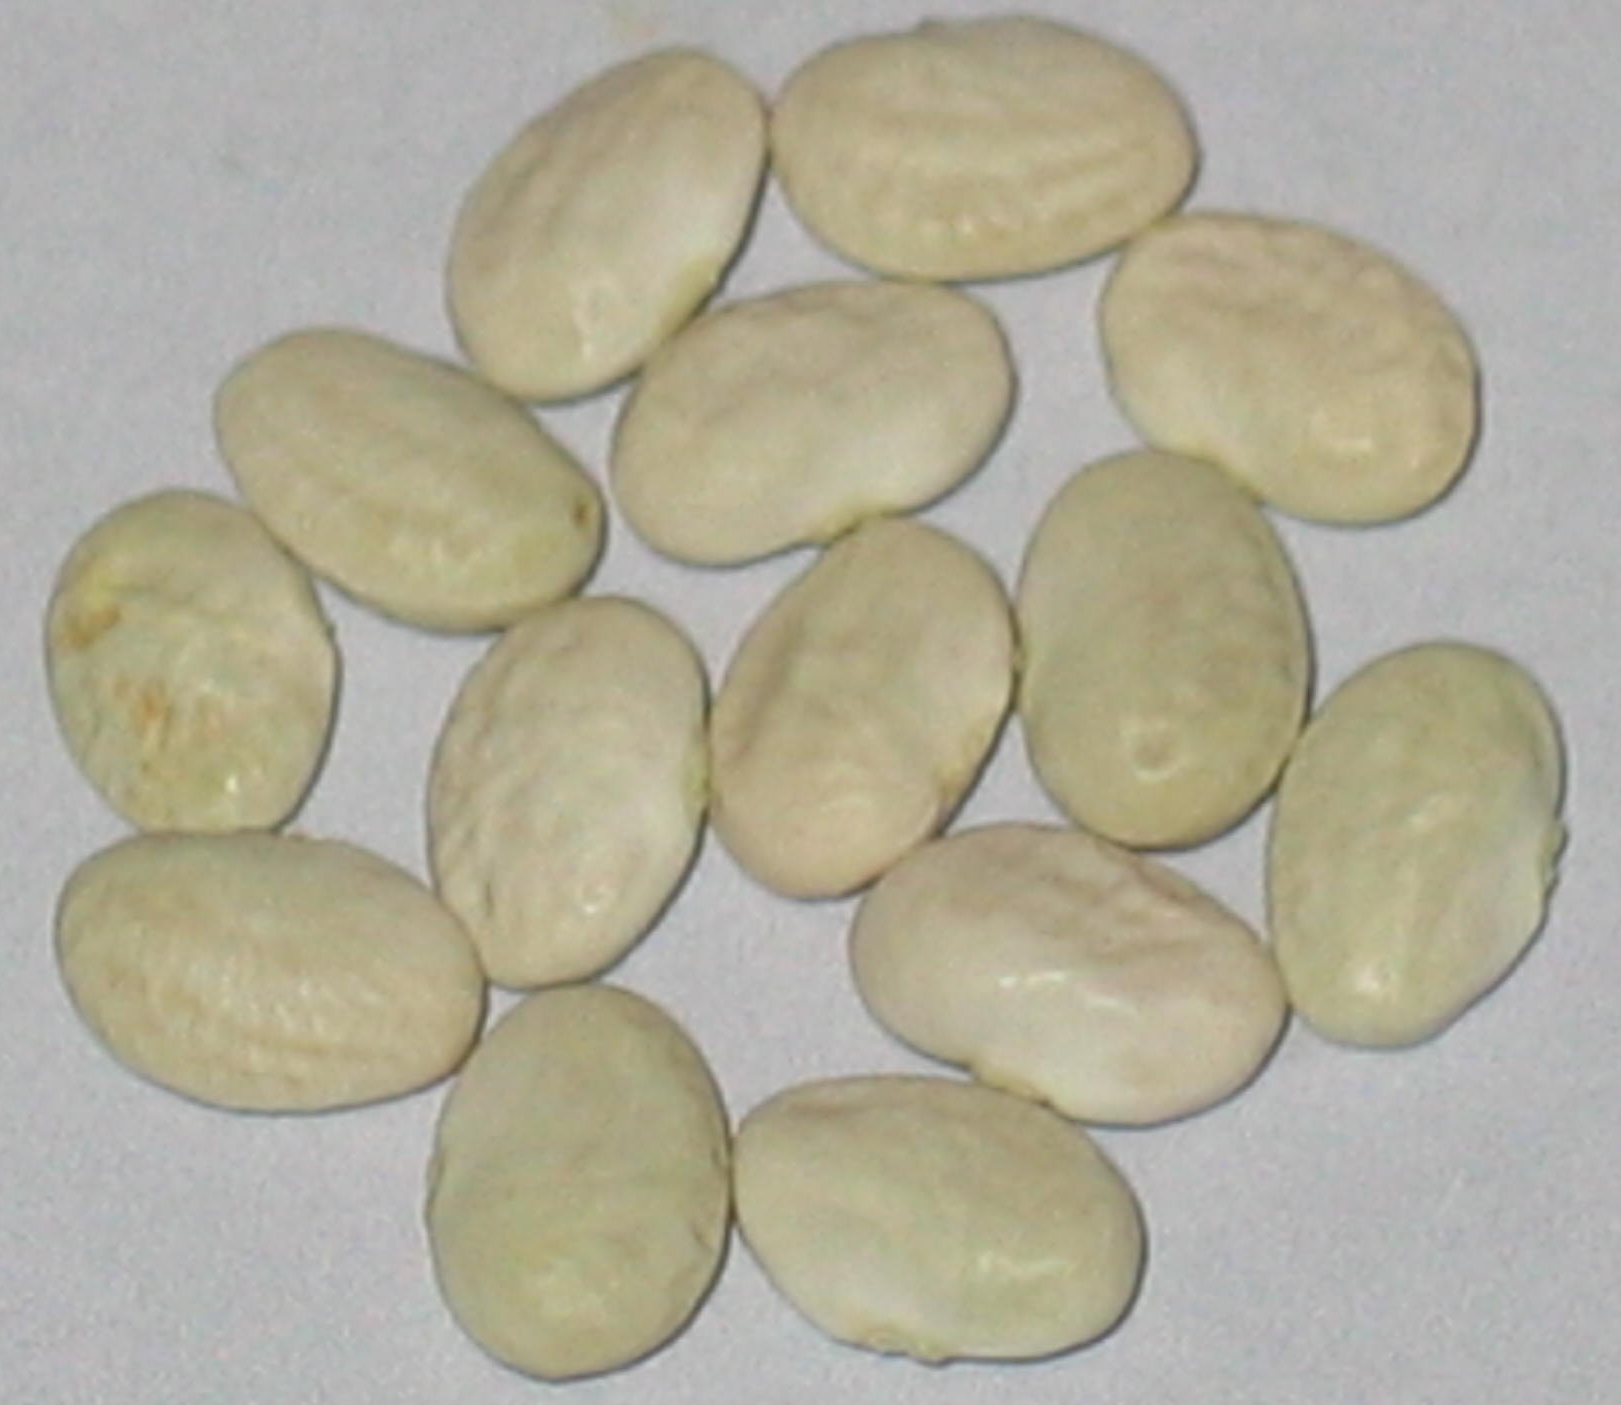 image of Boontjes beans